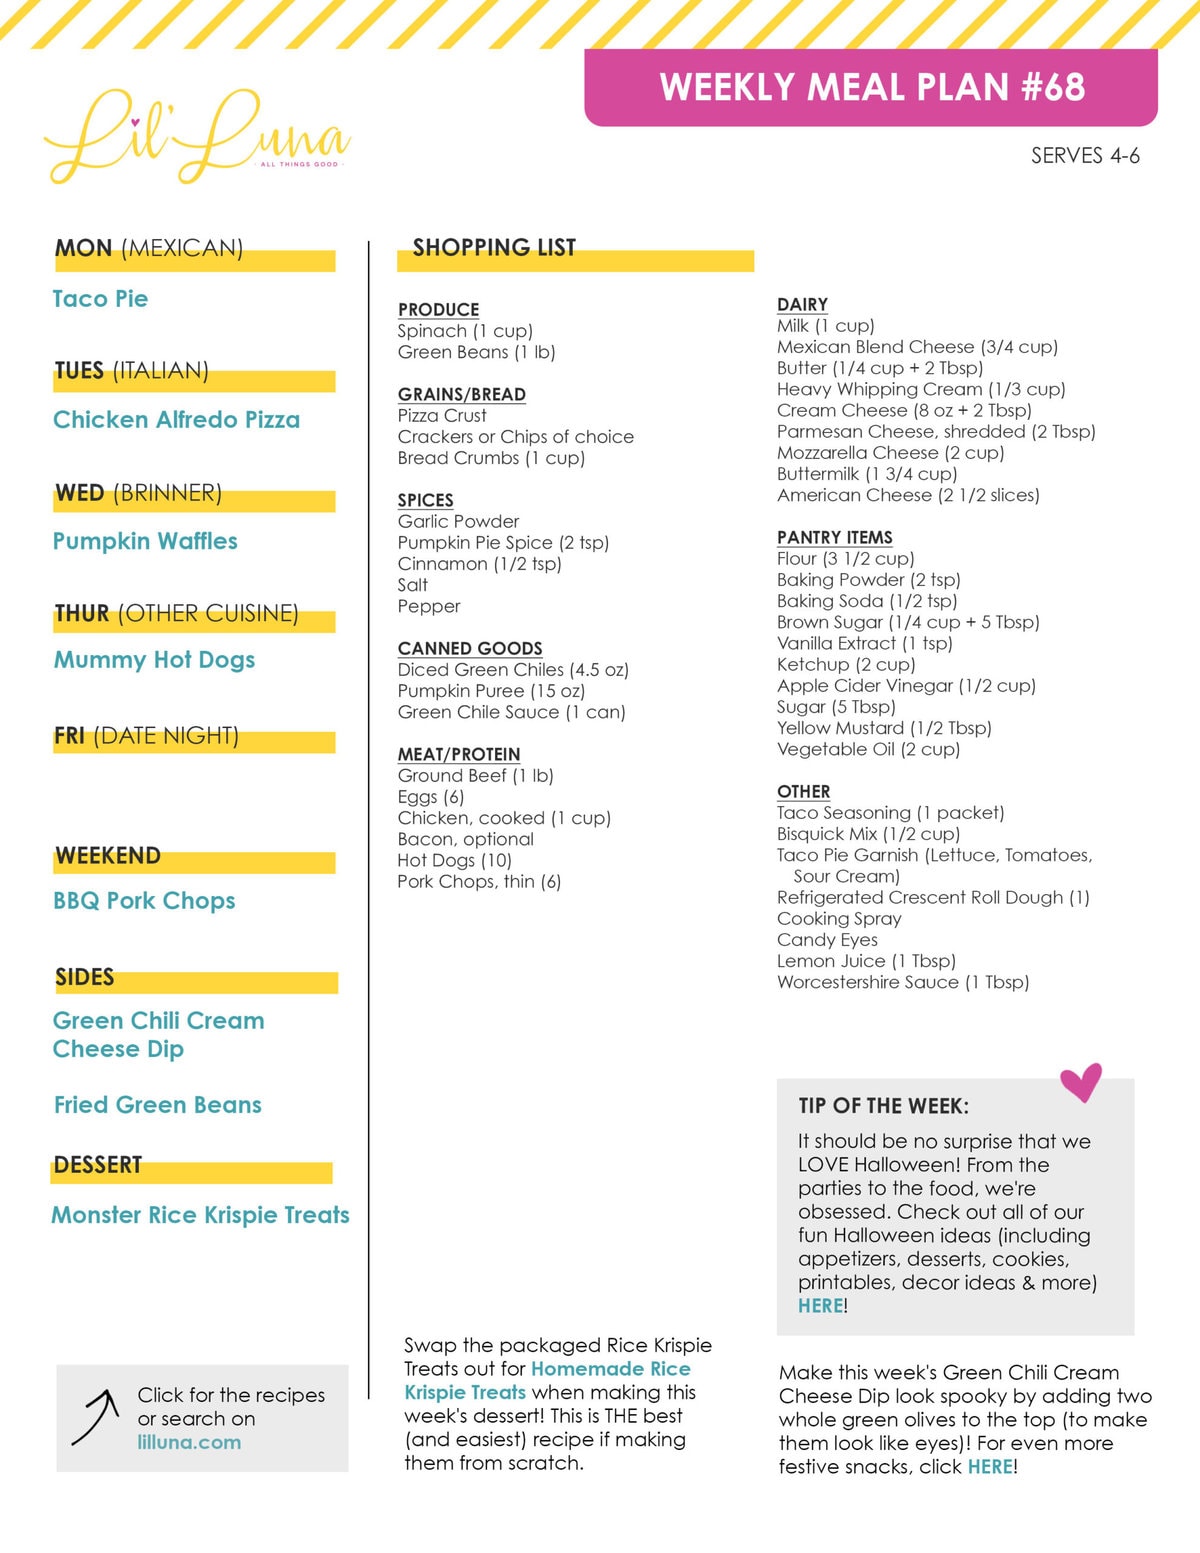 Printable version of Meal Plan #68 with grocery list.